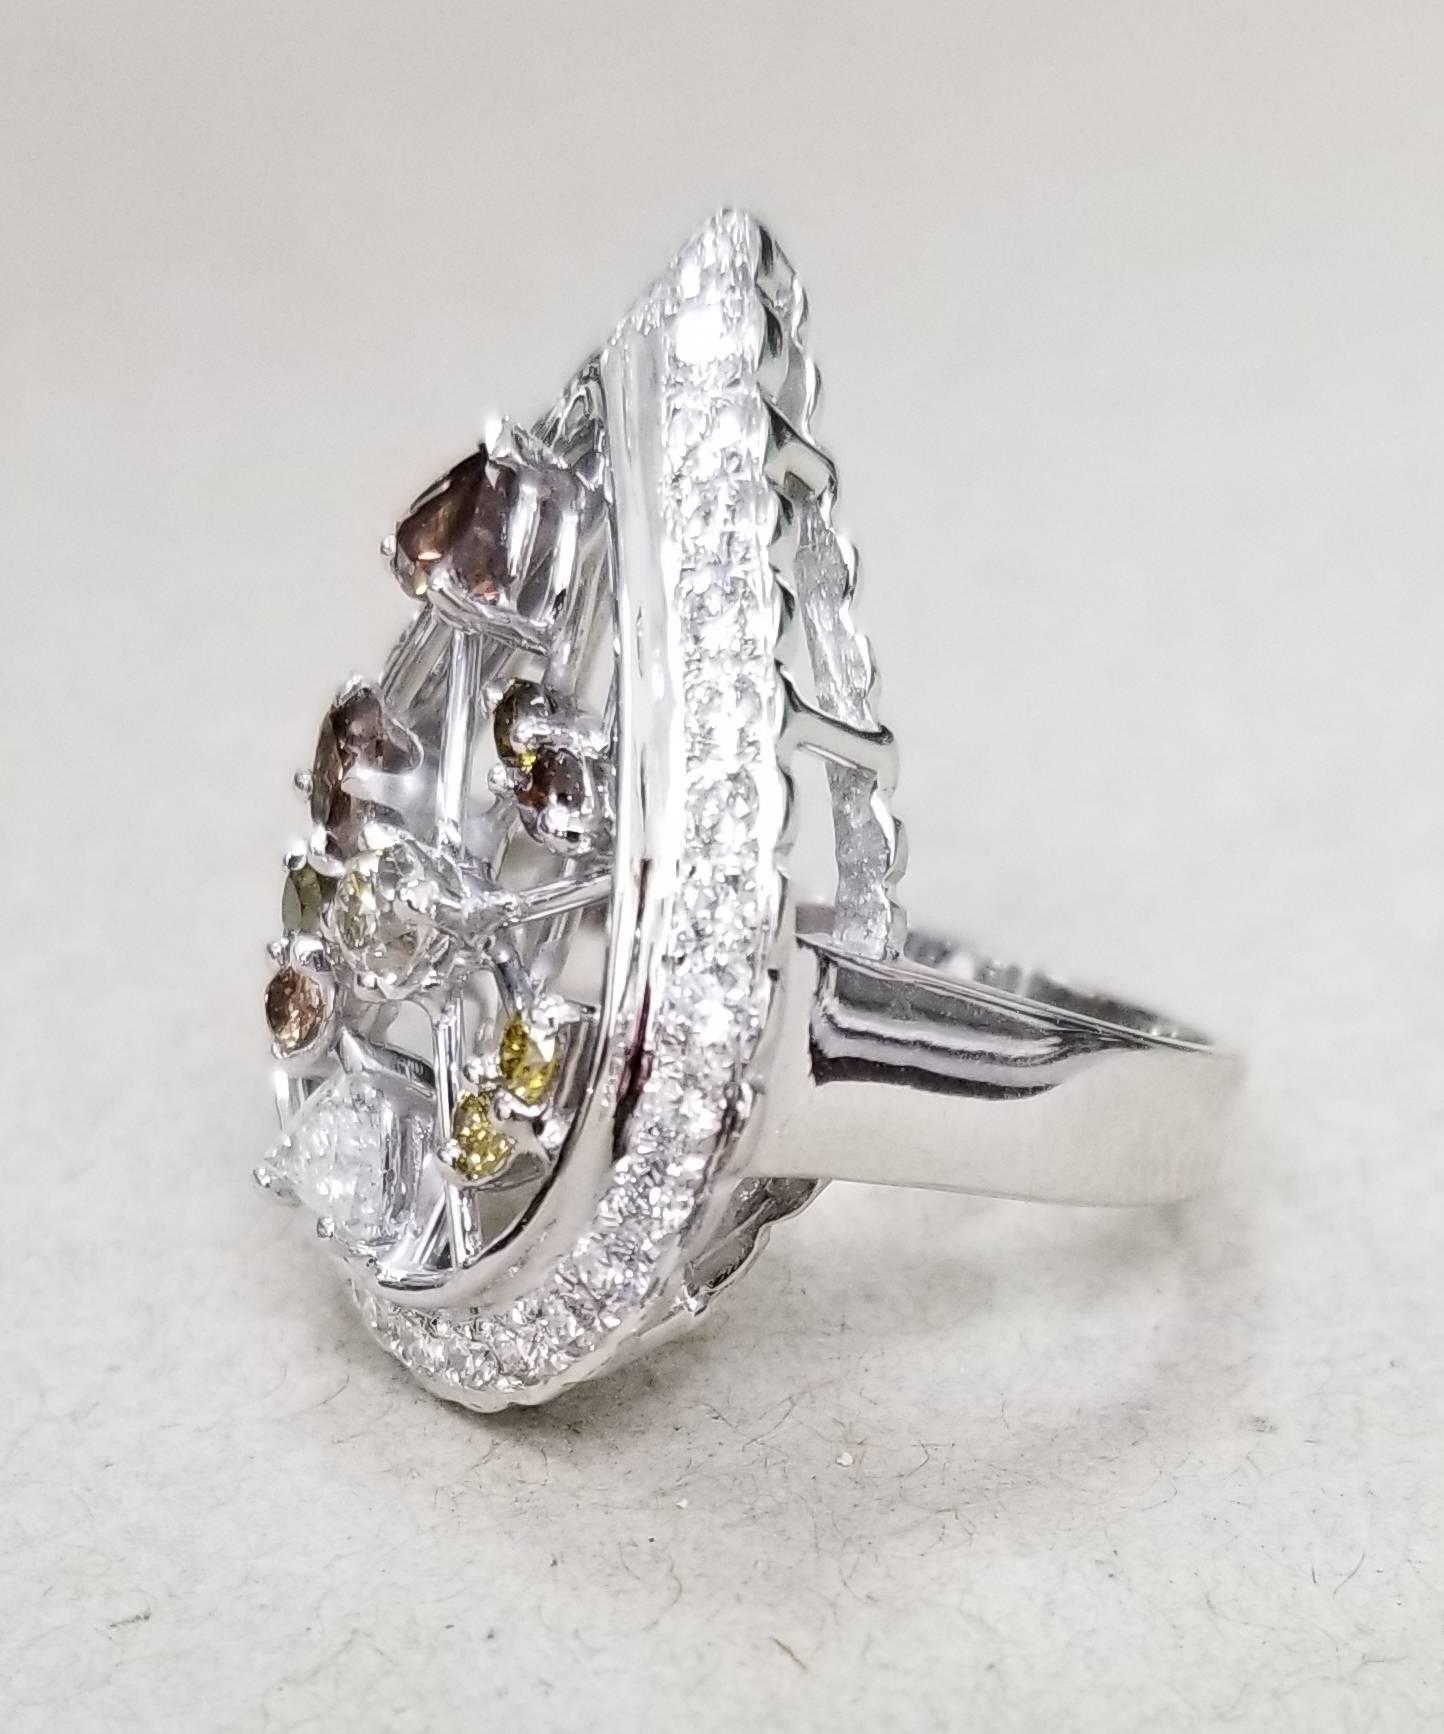 14k white gold pear shape setting with 30 round full cut diamonds of very fine quality weighing .90pts. set with 10 natural diamonds; white, yellow and brown weighing 1.15cts. ring size is 7 